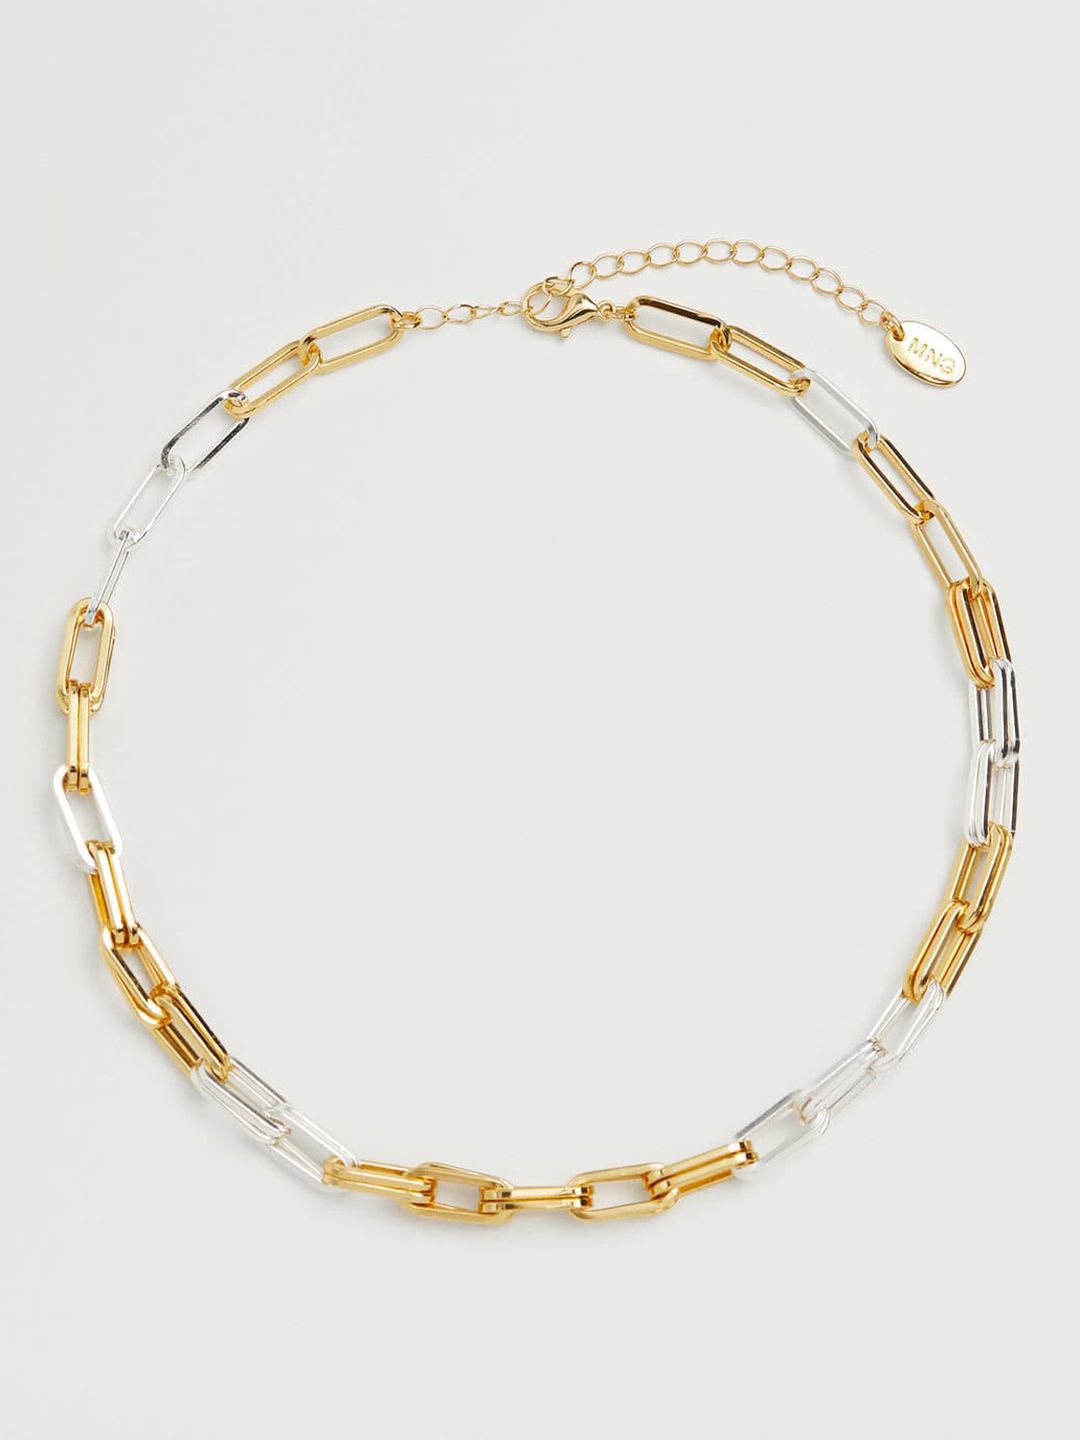 MANGO Women Gold-Toned & Silver-Toned Linked Chain Necklace Price in India